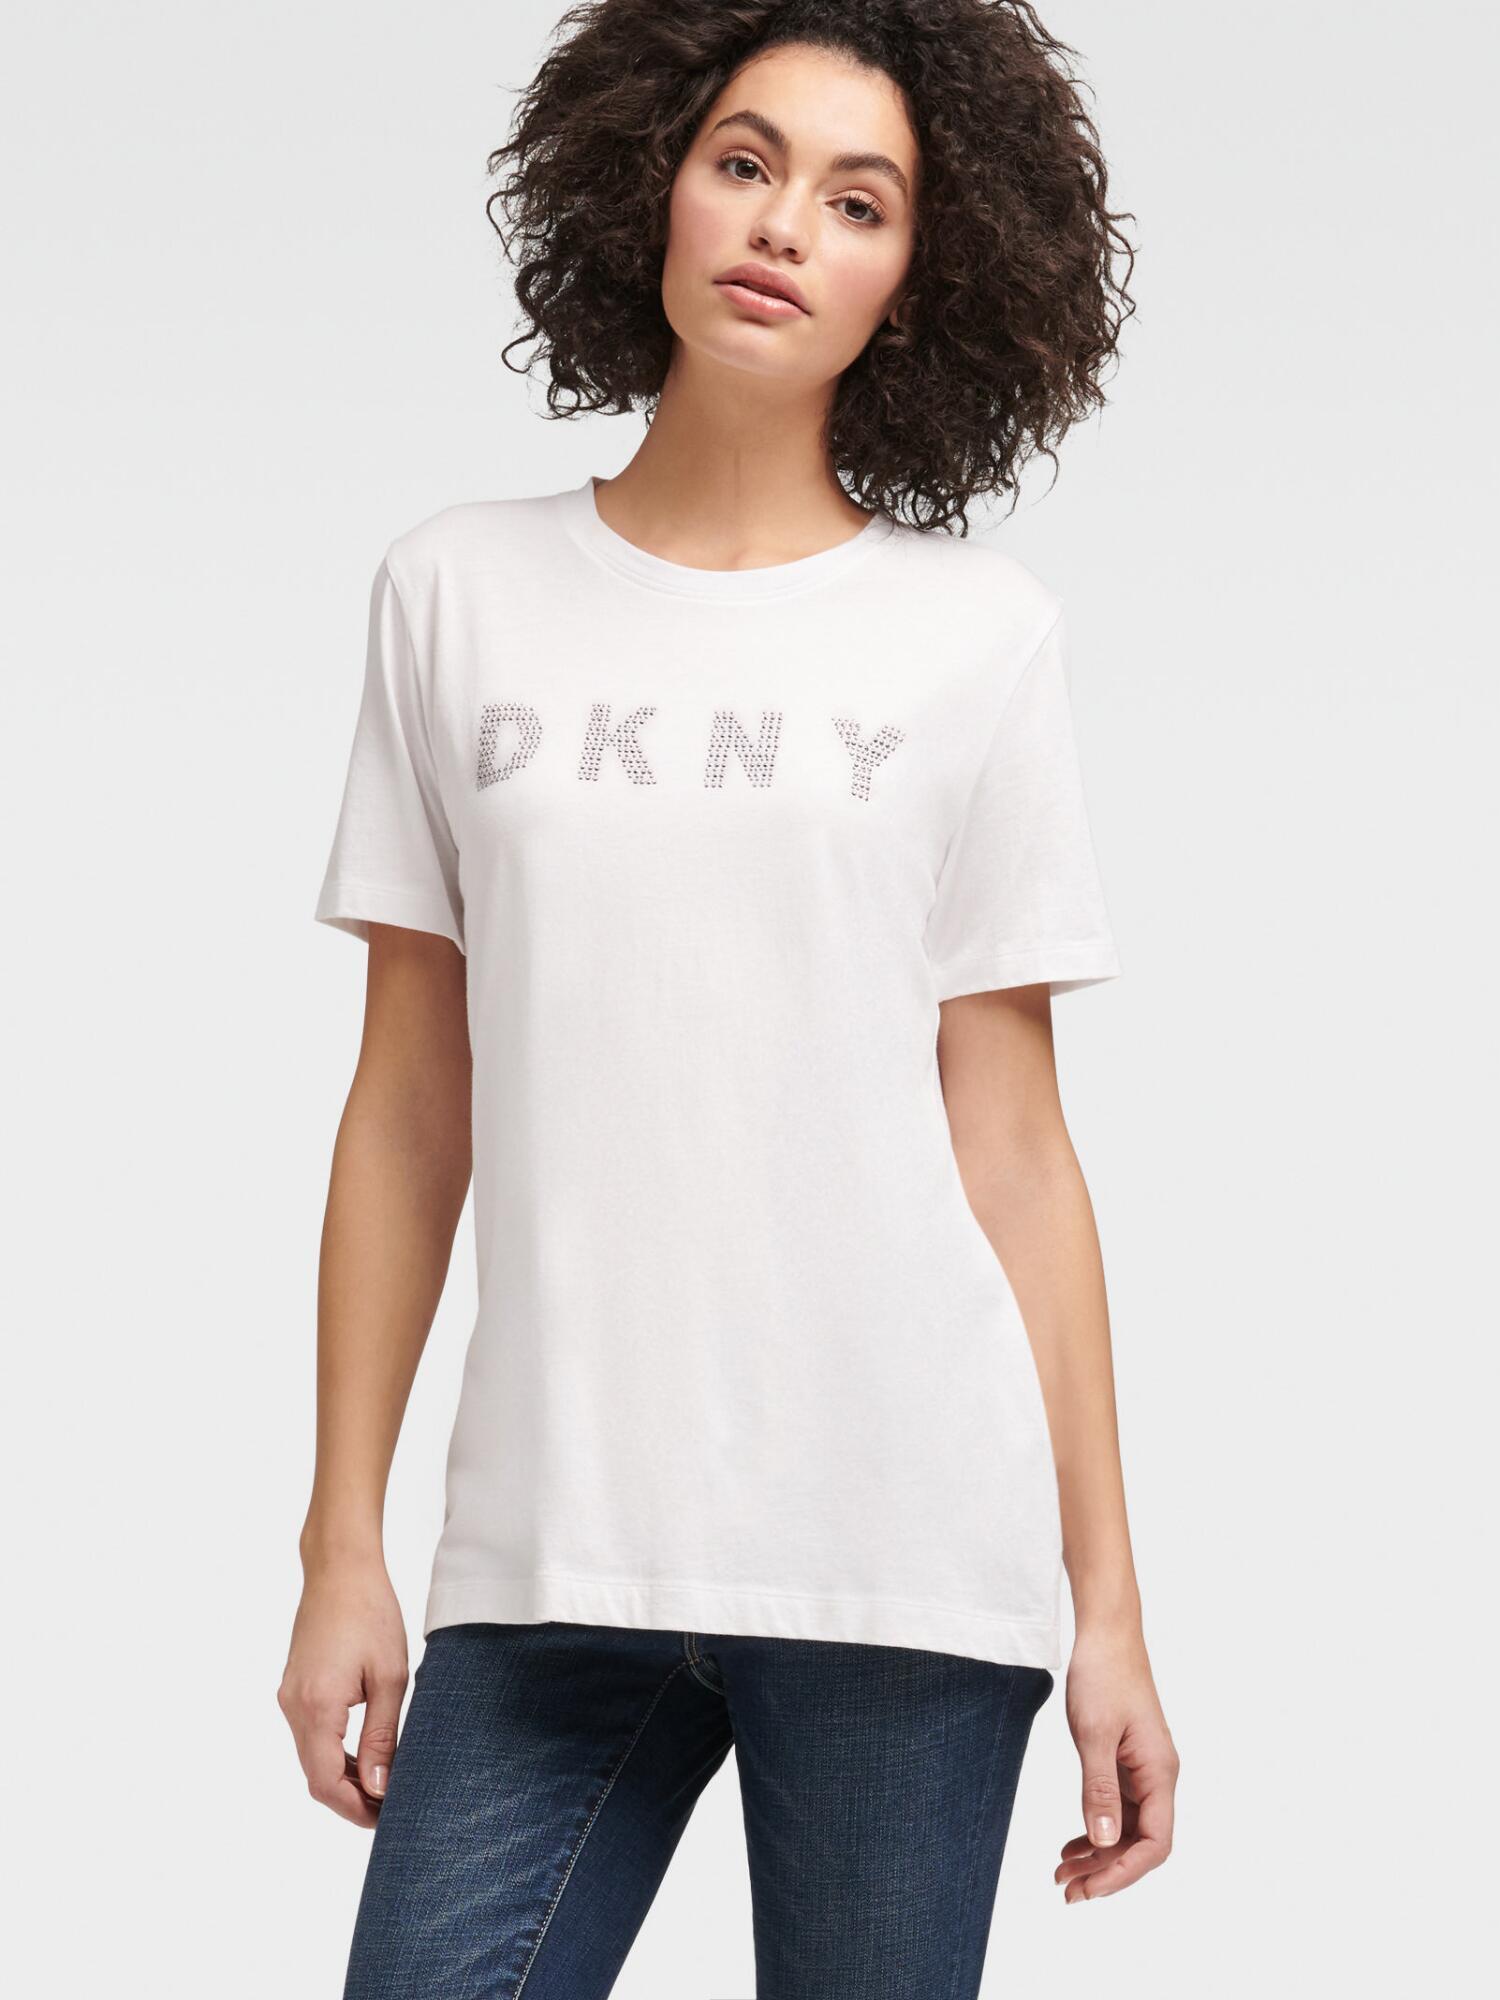 DKNY Studded-logo Tee in White - Lyst